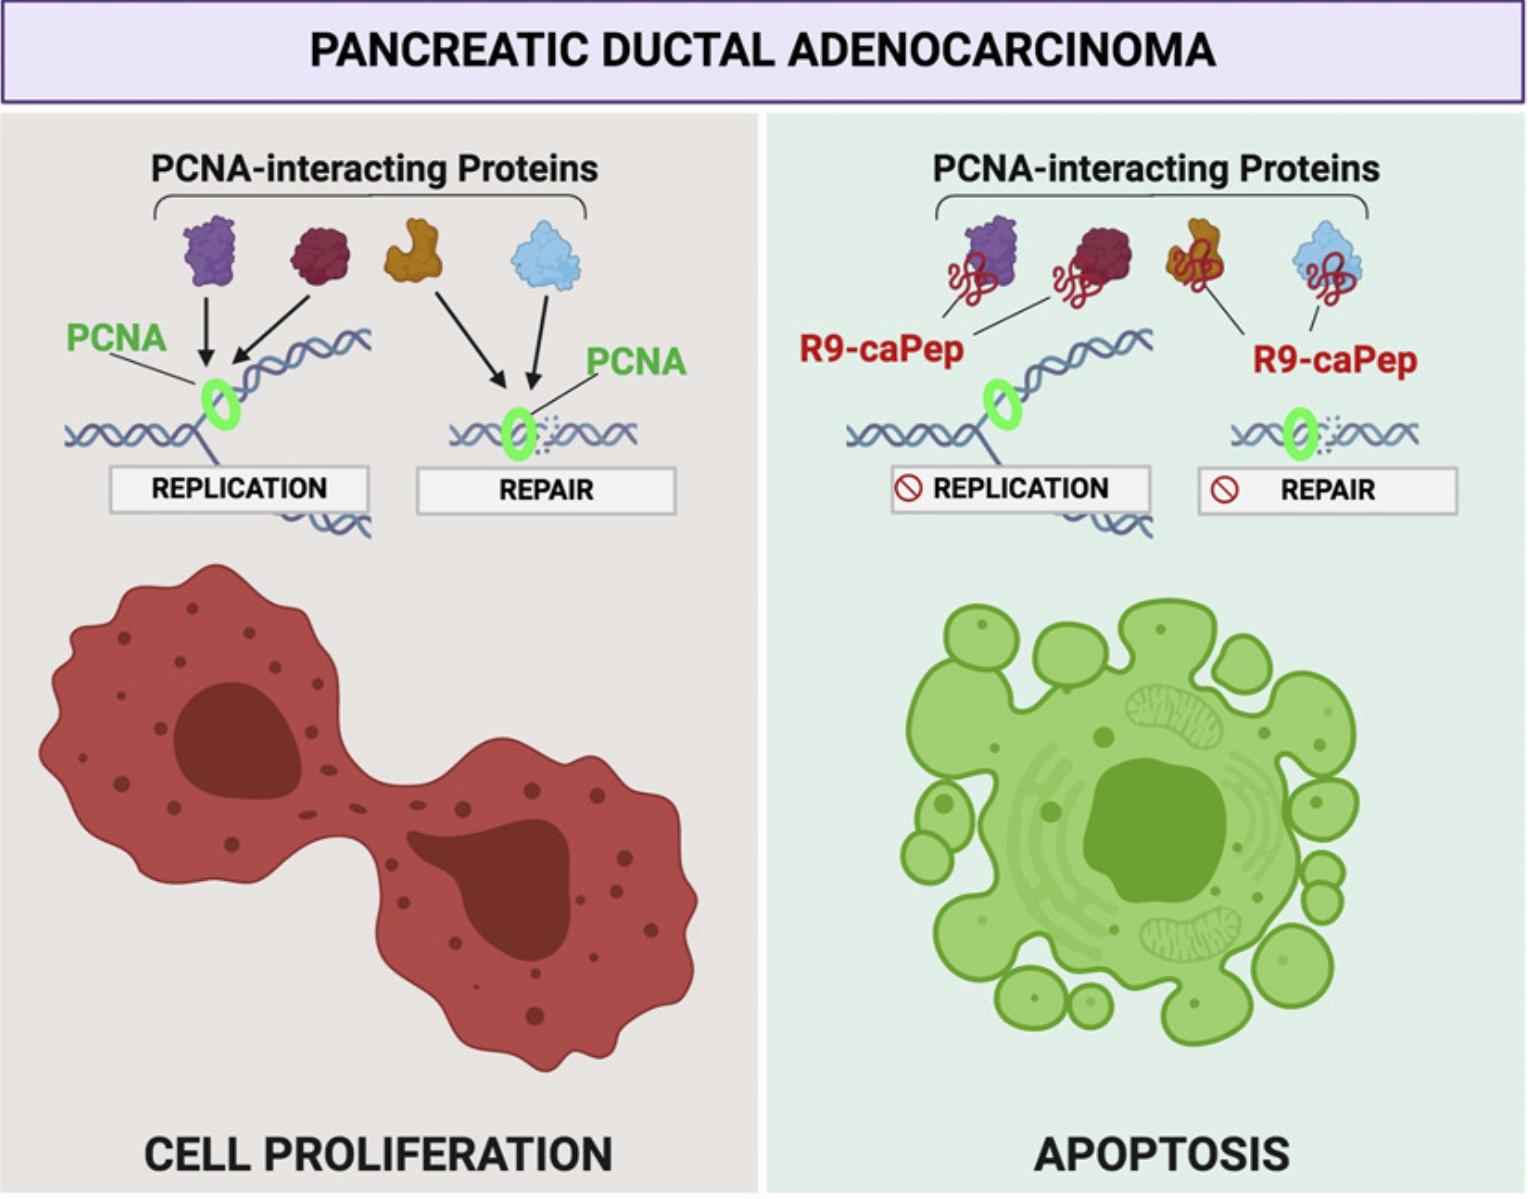 Figure 1. Molecular targeting of cancer-associated PCNA interactions in pancreatic ductal adenocarcinoma. (Smith S J, et al., 2020)